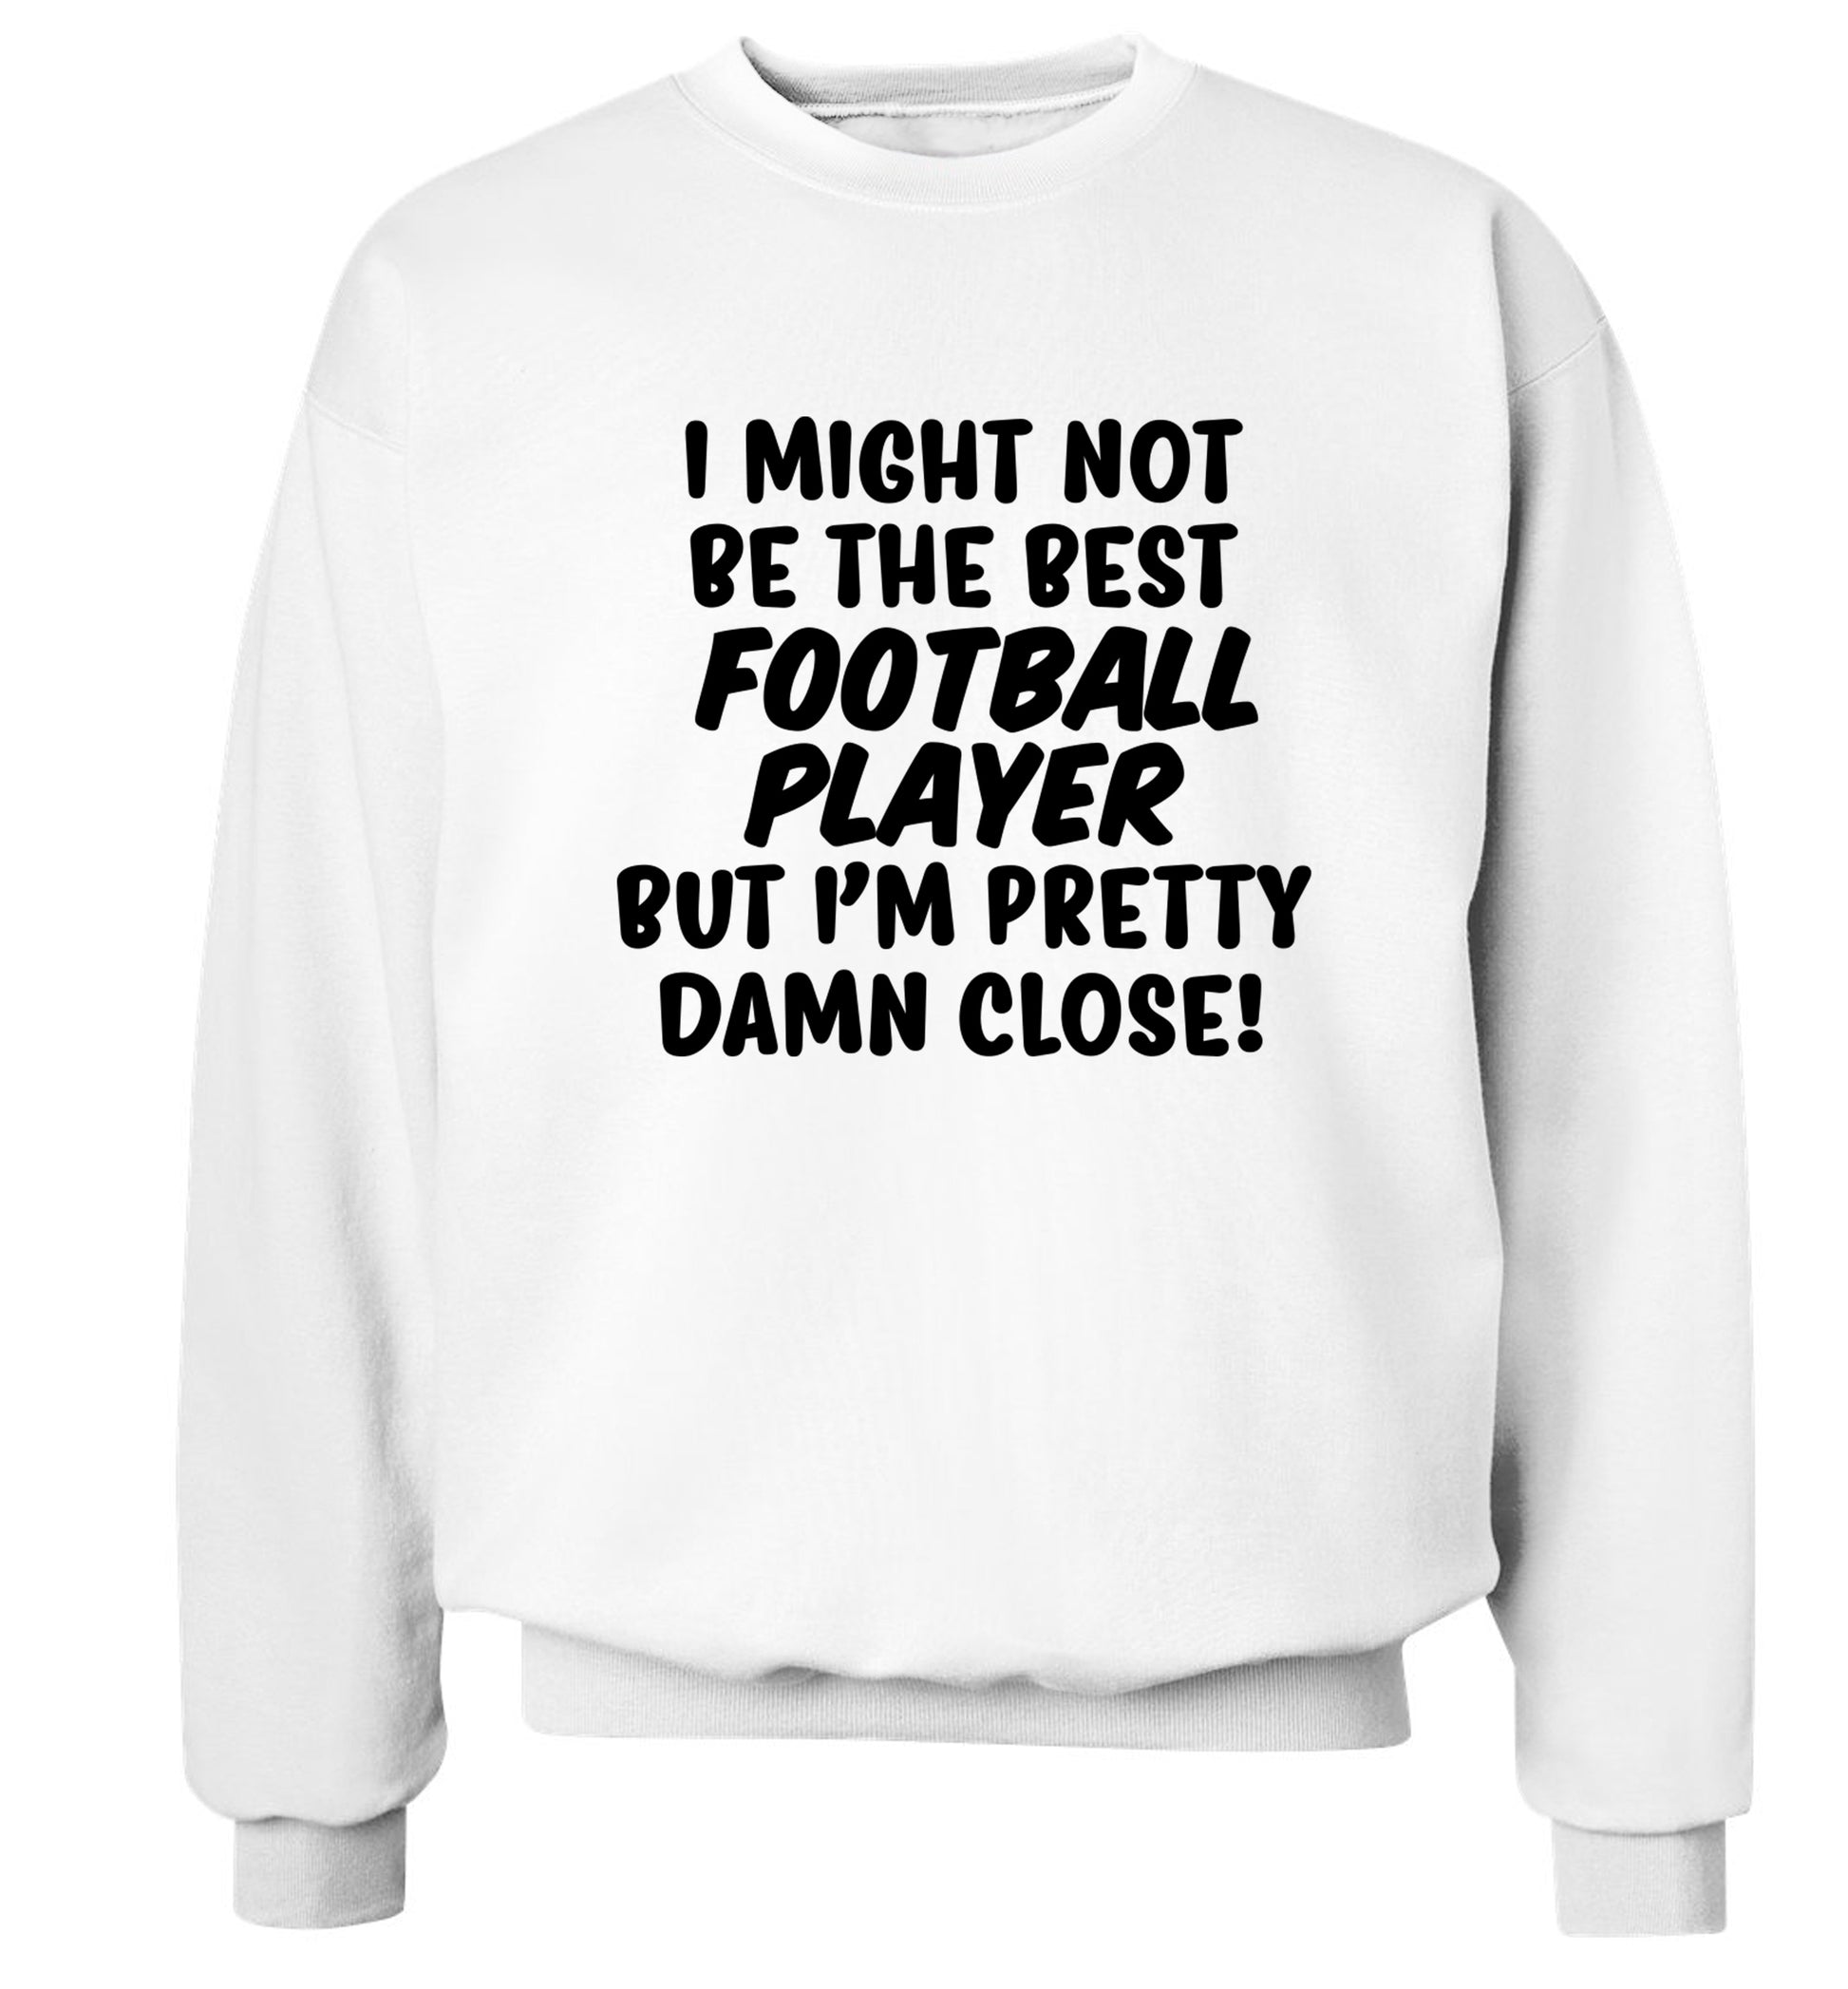 I might not be the best football player but I'm pretty close! Adult's unisexwhite Sweater 2XL